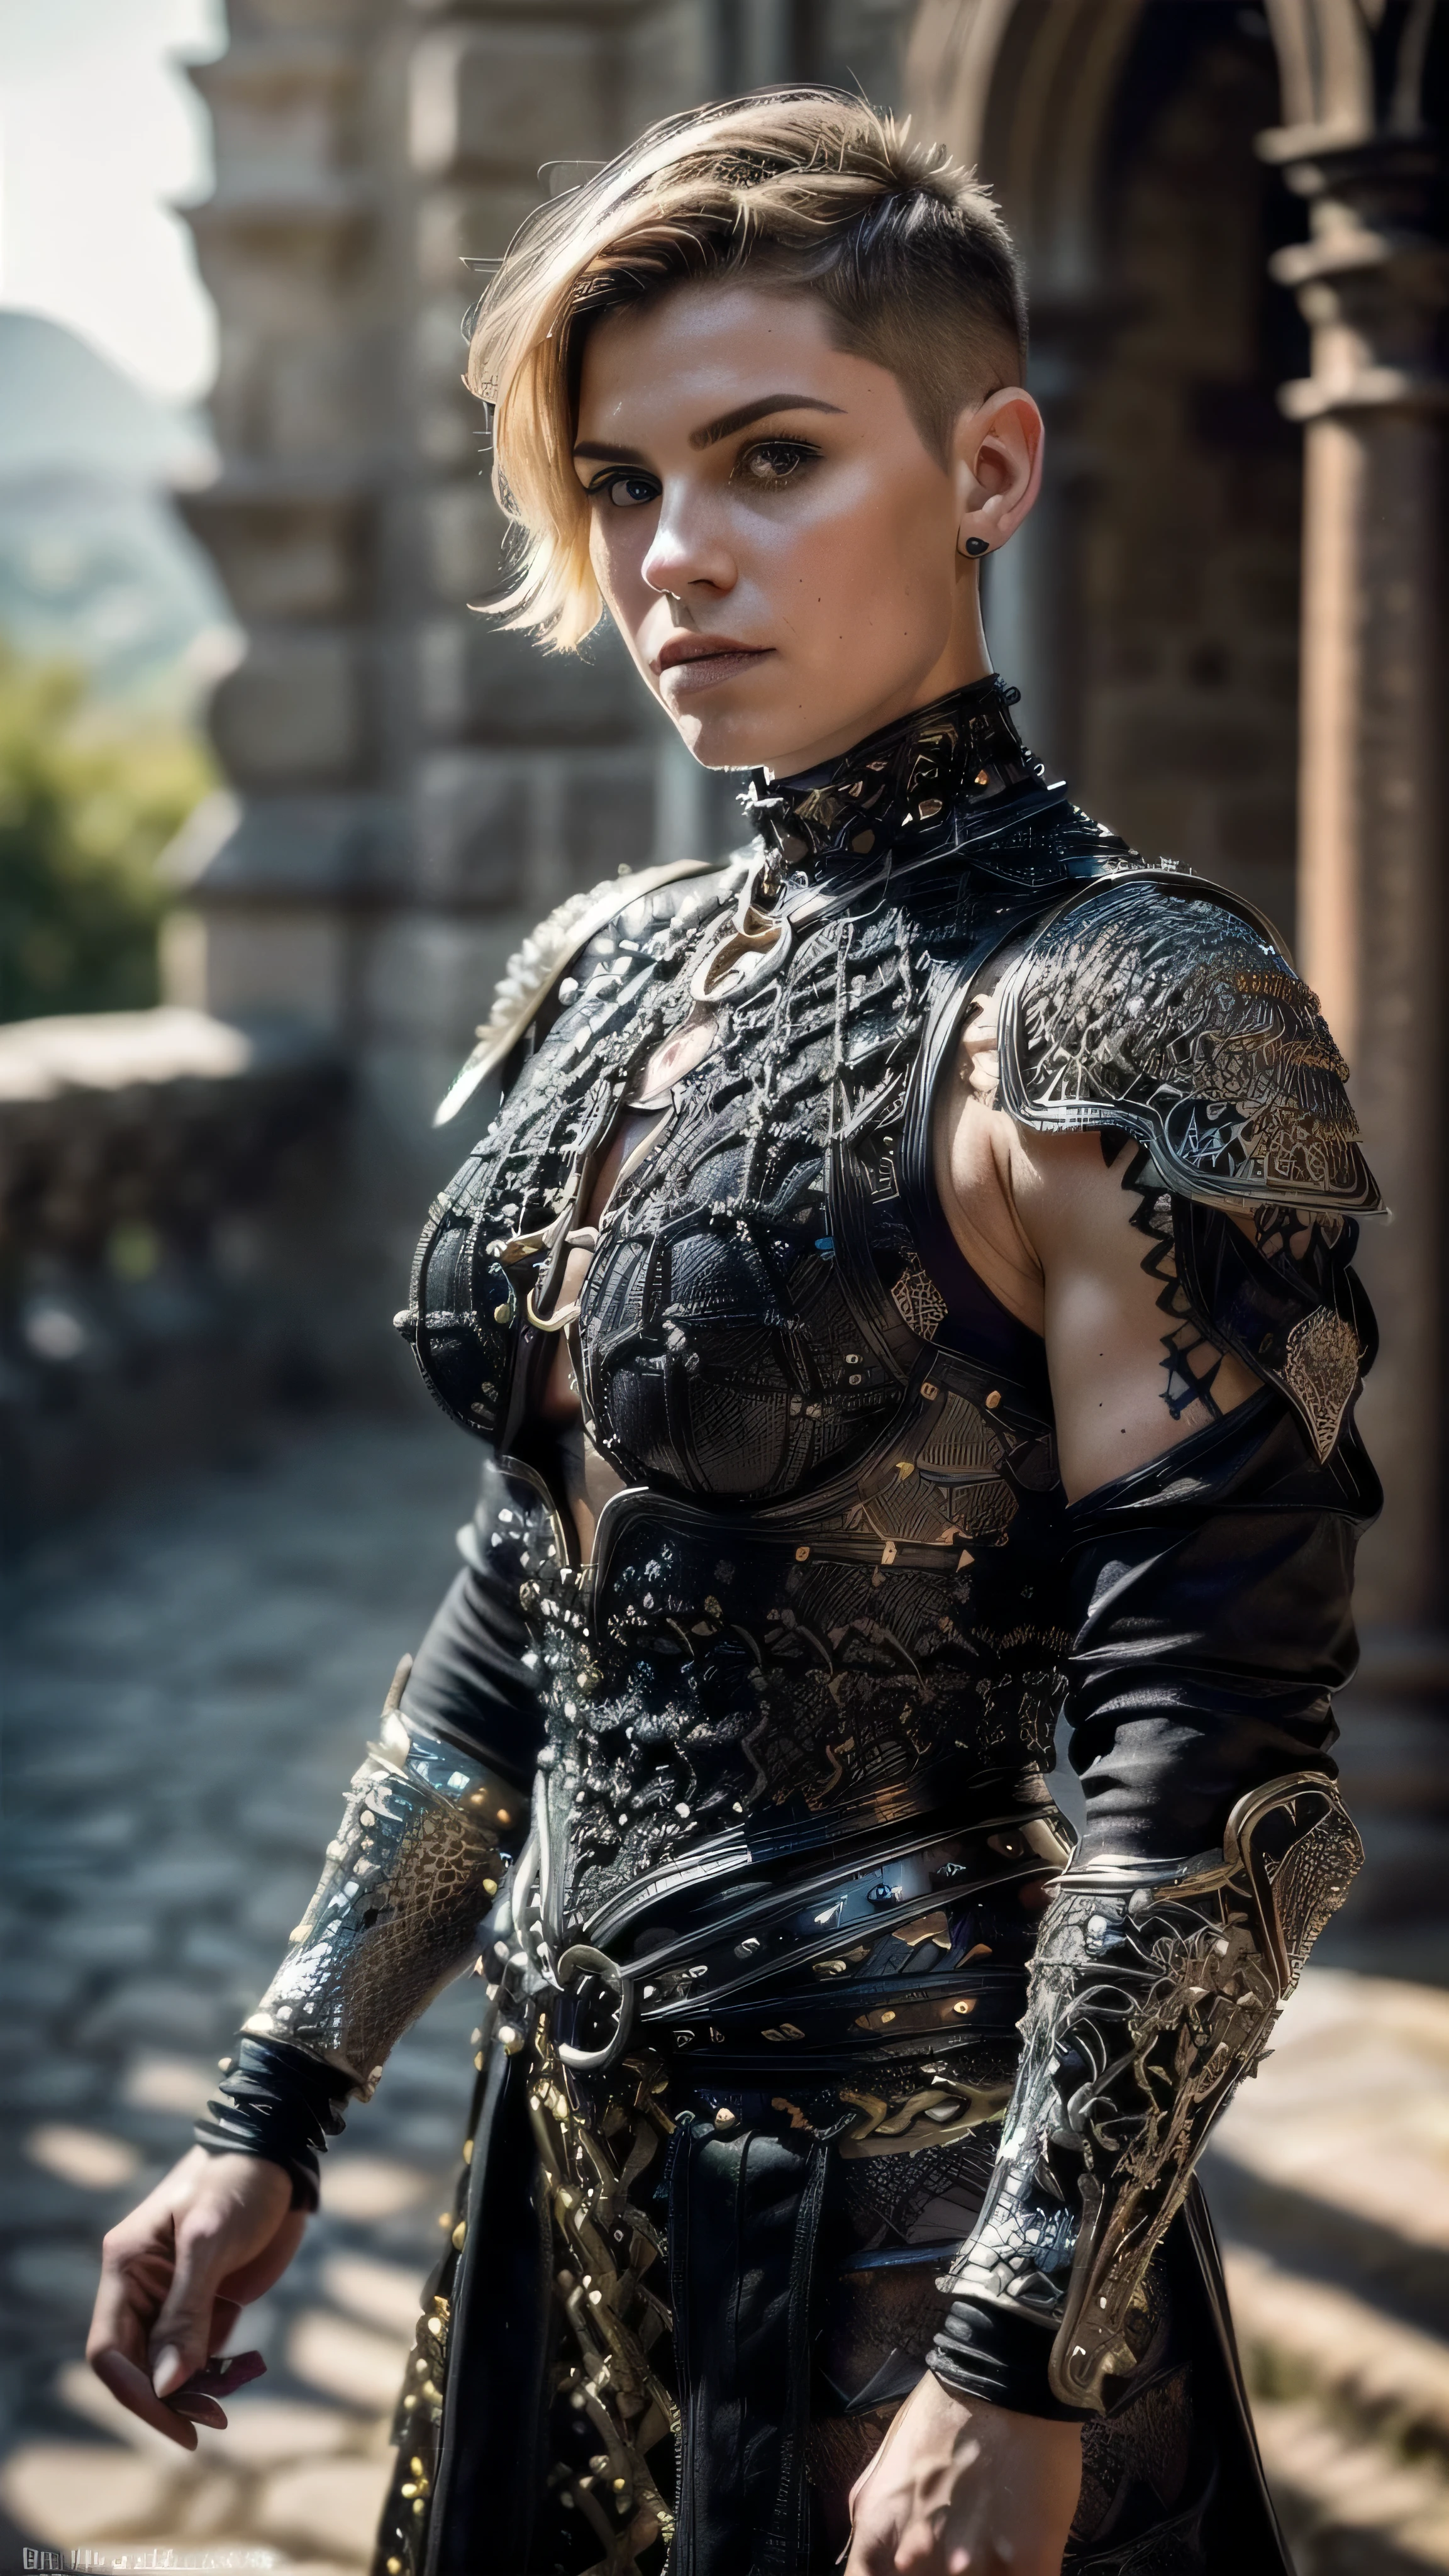 (masterpiece), (extremely intricate:1.3), (realistic), portrait of a muscular bodybuilder girl, (((medieval armor:1.6 (black gold filigree) breastplate, perfectchainmail), wind blown blowing [blonde hair:dark hair:0.6], [flat chest:large breasts:0.8]), from below), tattoo:1.0), metal reflections, upper body, outdoors, intense sunlight, far away castle, professional photograph of a stunning woman detailed, (((short undercut shaved hair, dynamic pose))), sharp focus, dramatic, award winning, cinematic lighting, volumetrics dtx, (film grain, blurry background, blurry foreground, bokeh, depth of field, sunset, interaction, blackiron Perfectchainmail ribbons), 8K